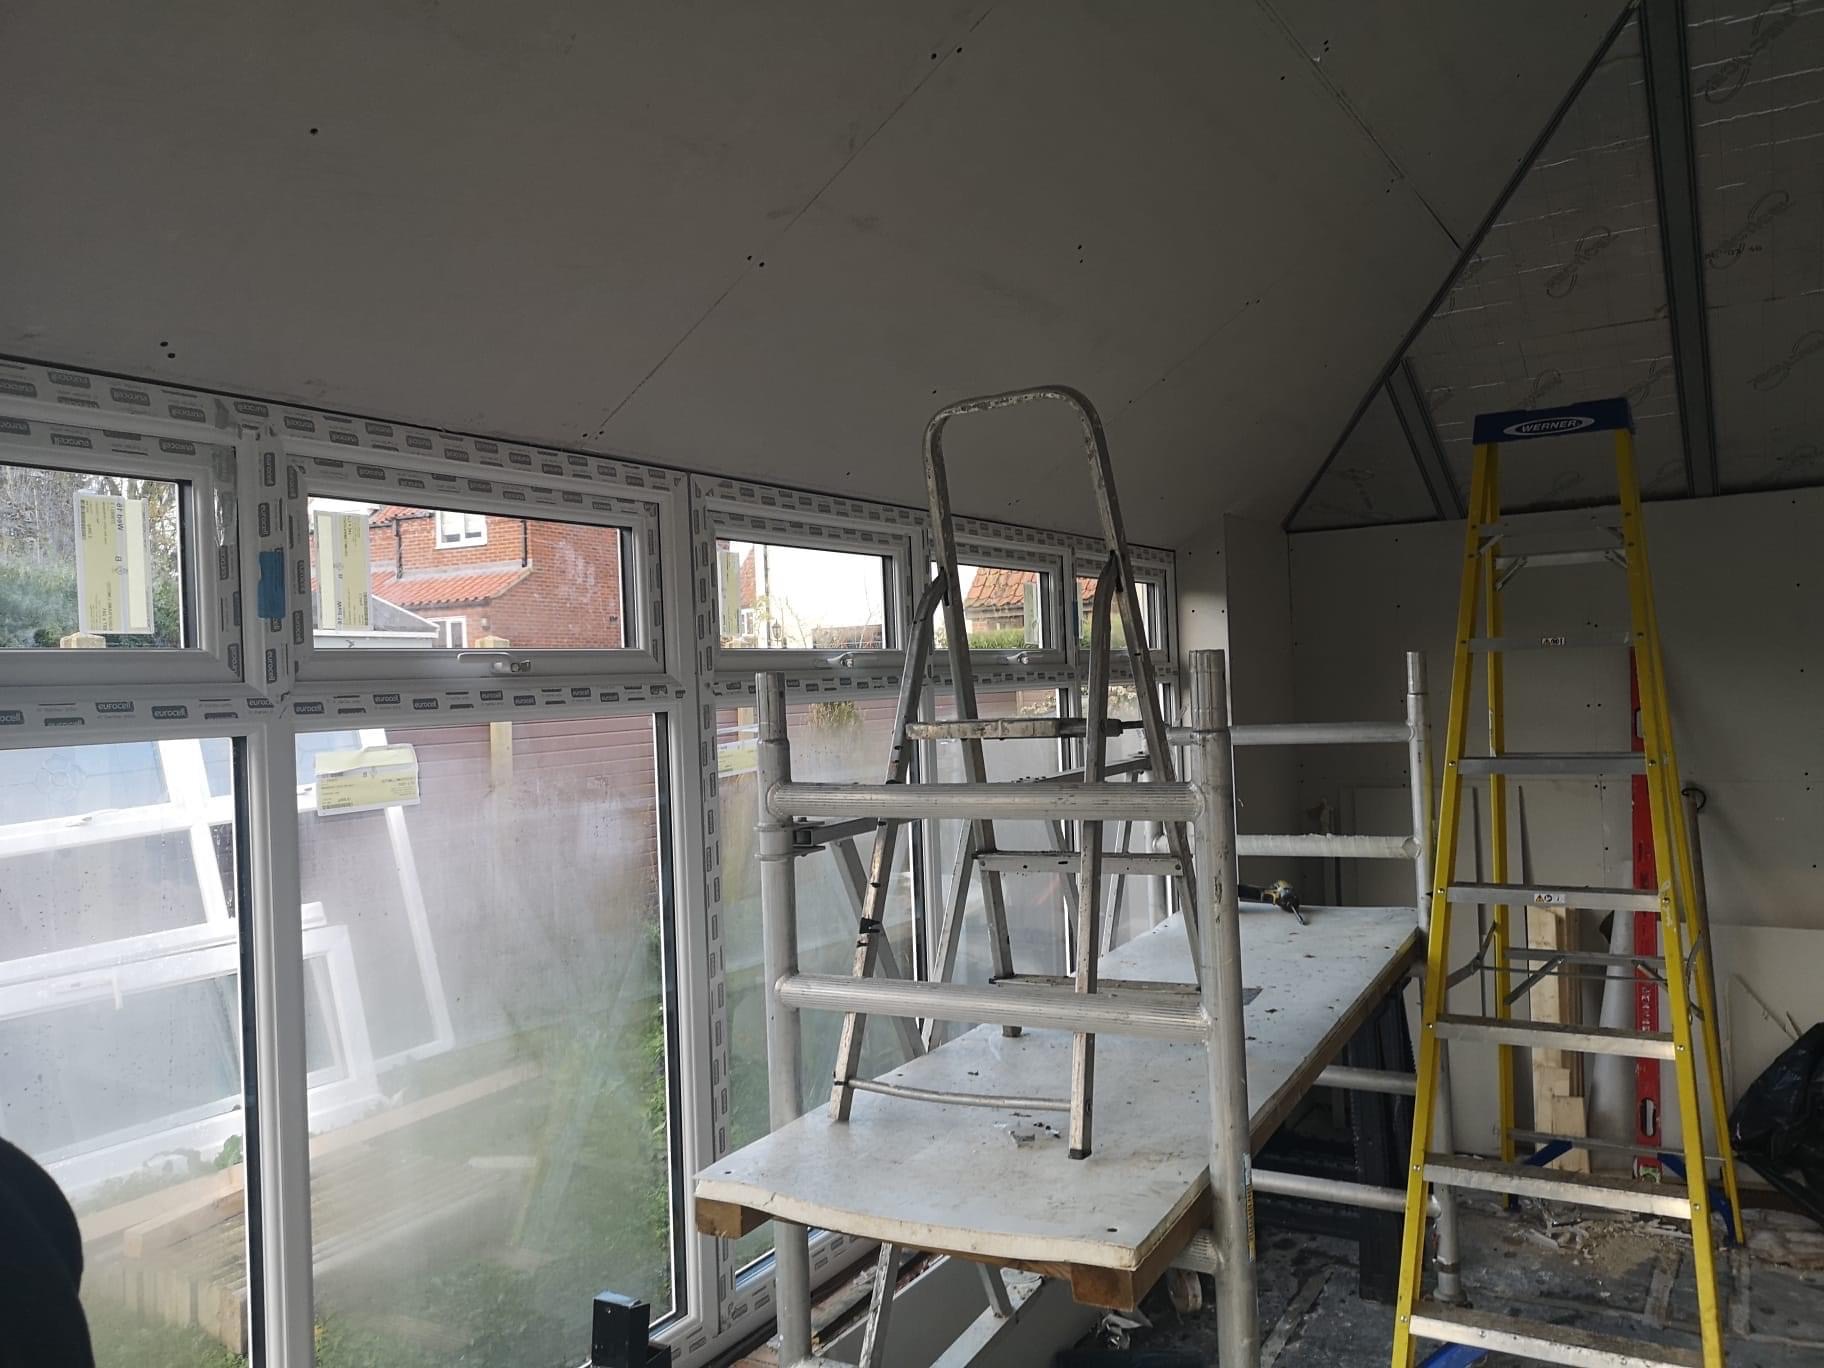 Construction work of conservatory roof with ladders